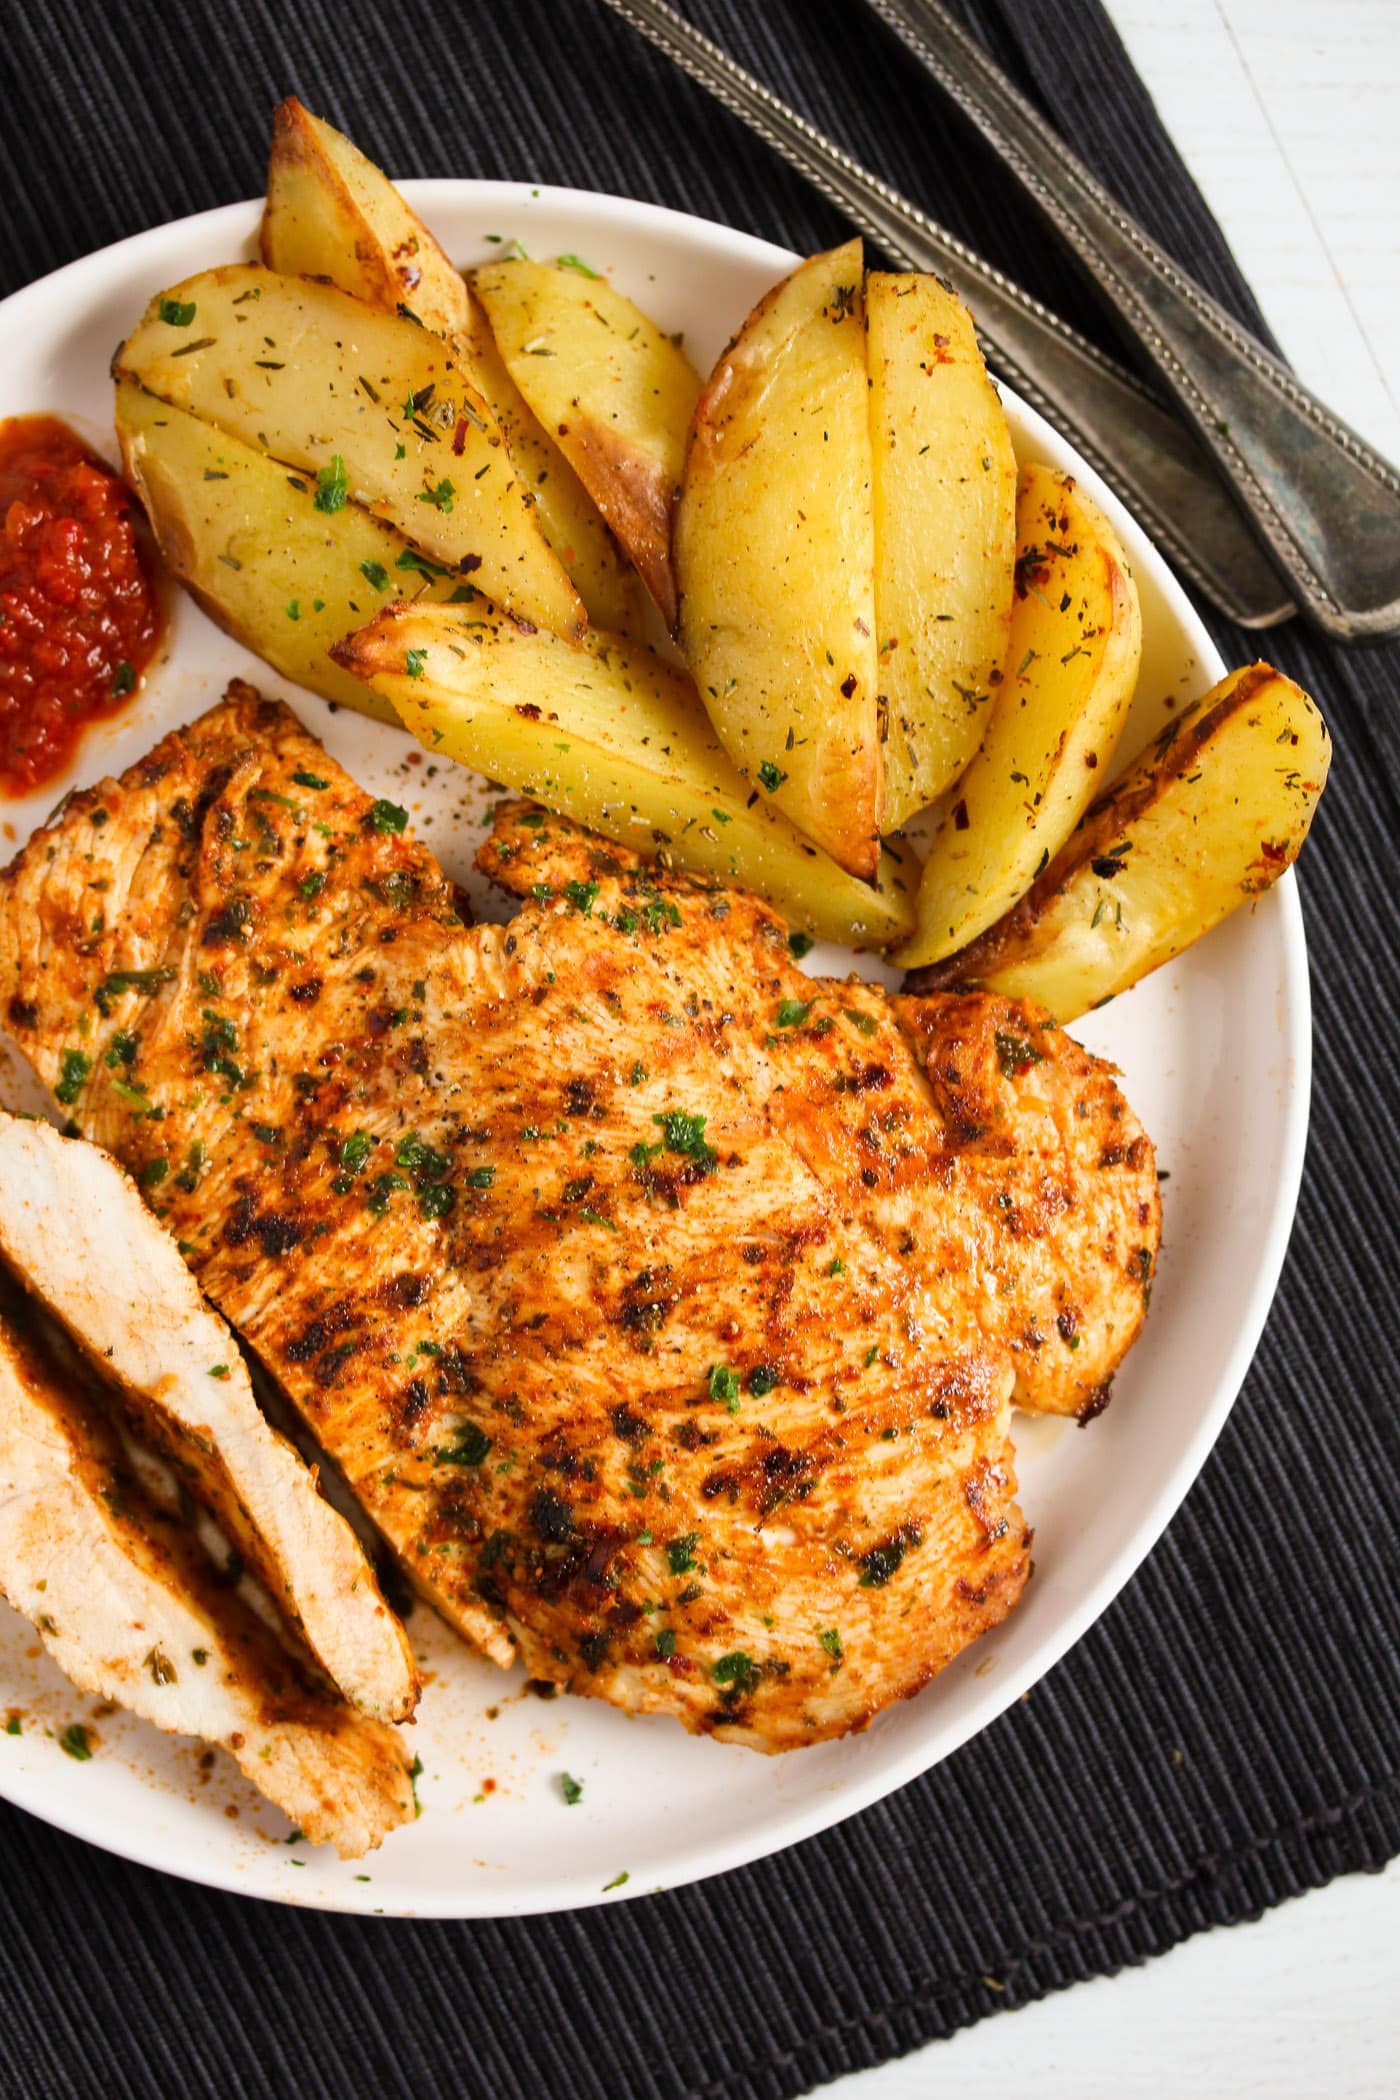 sliced grilled nando's chicken breast with oven potatoes and dip.